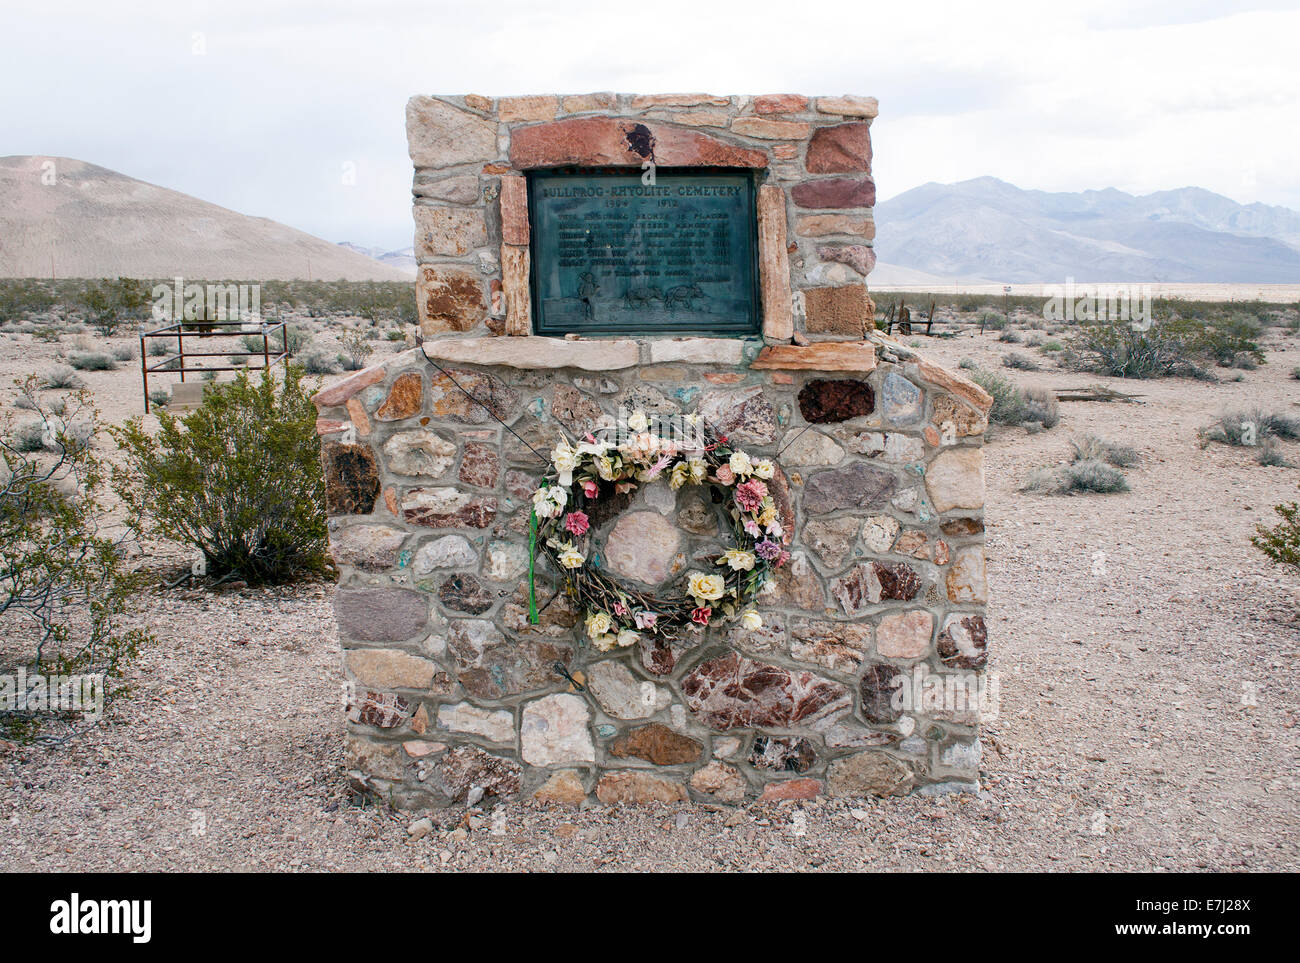 Grave in the cemetery in the Ghost town of Rhyolite Nevada Stock Photo